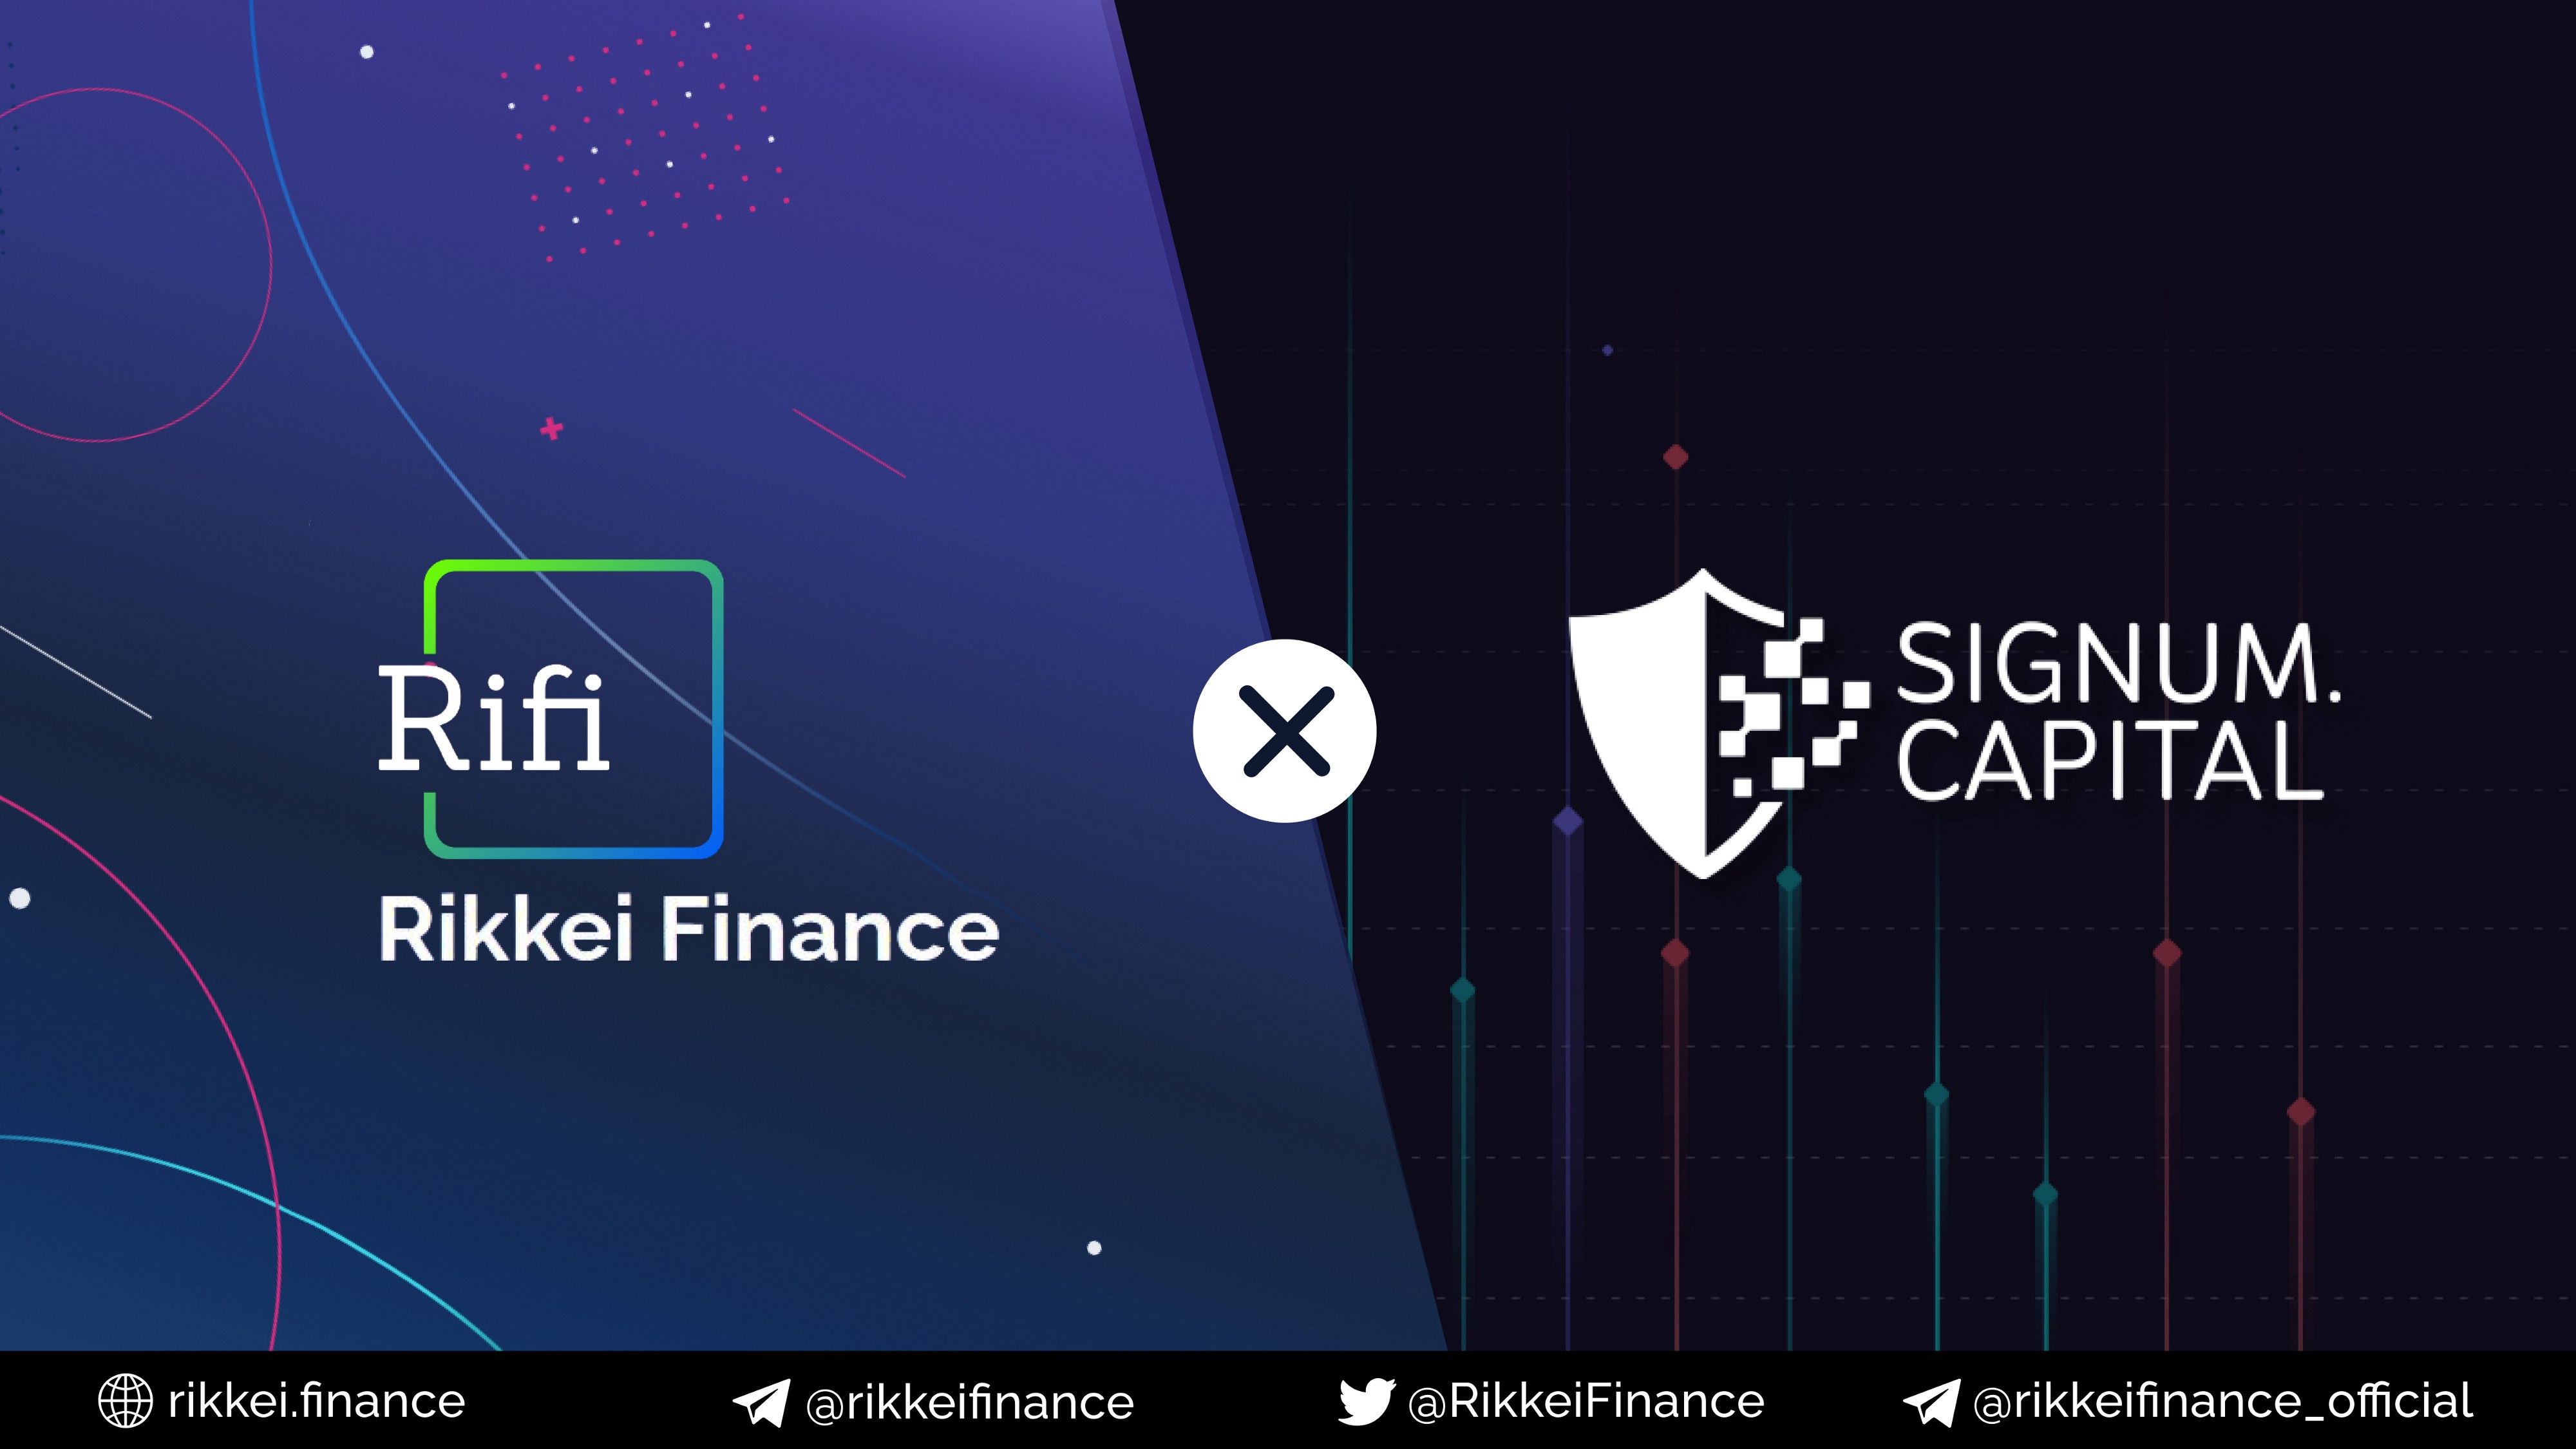 Signum Capital Invests in Rikkei Finance